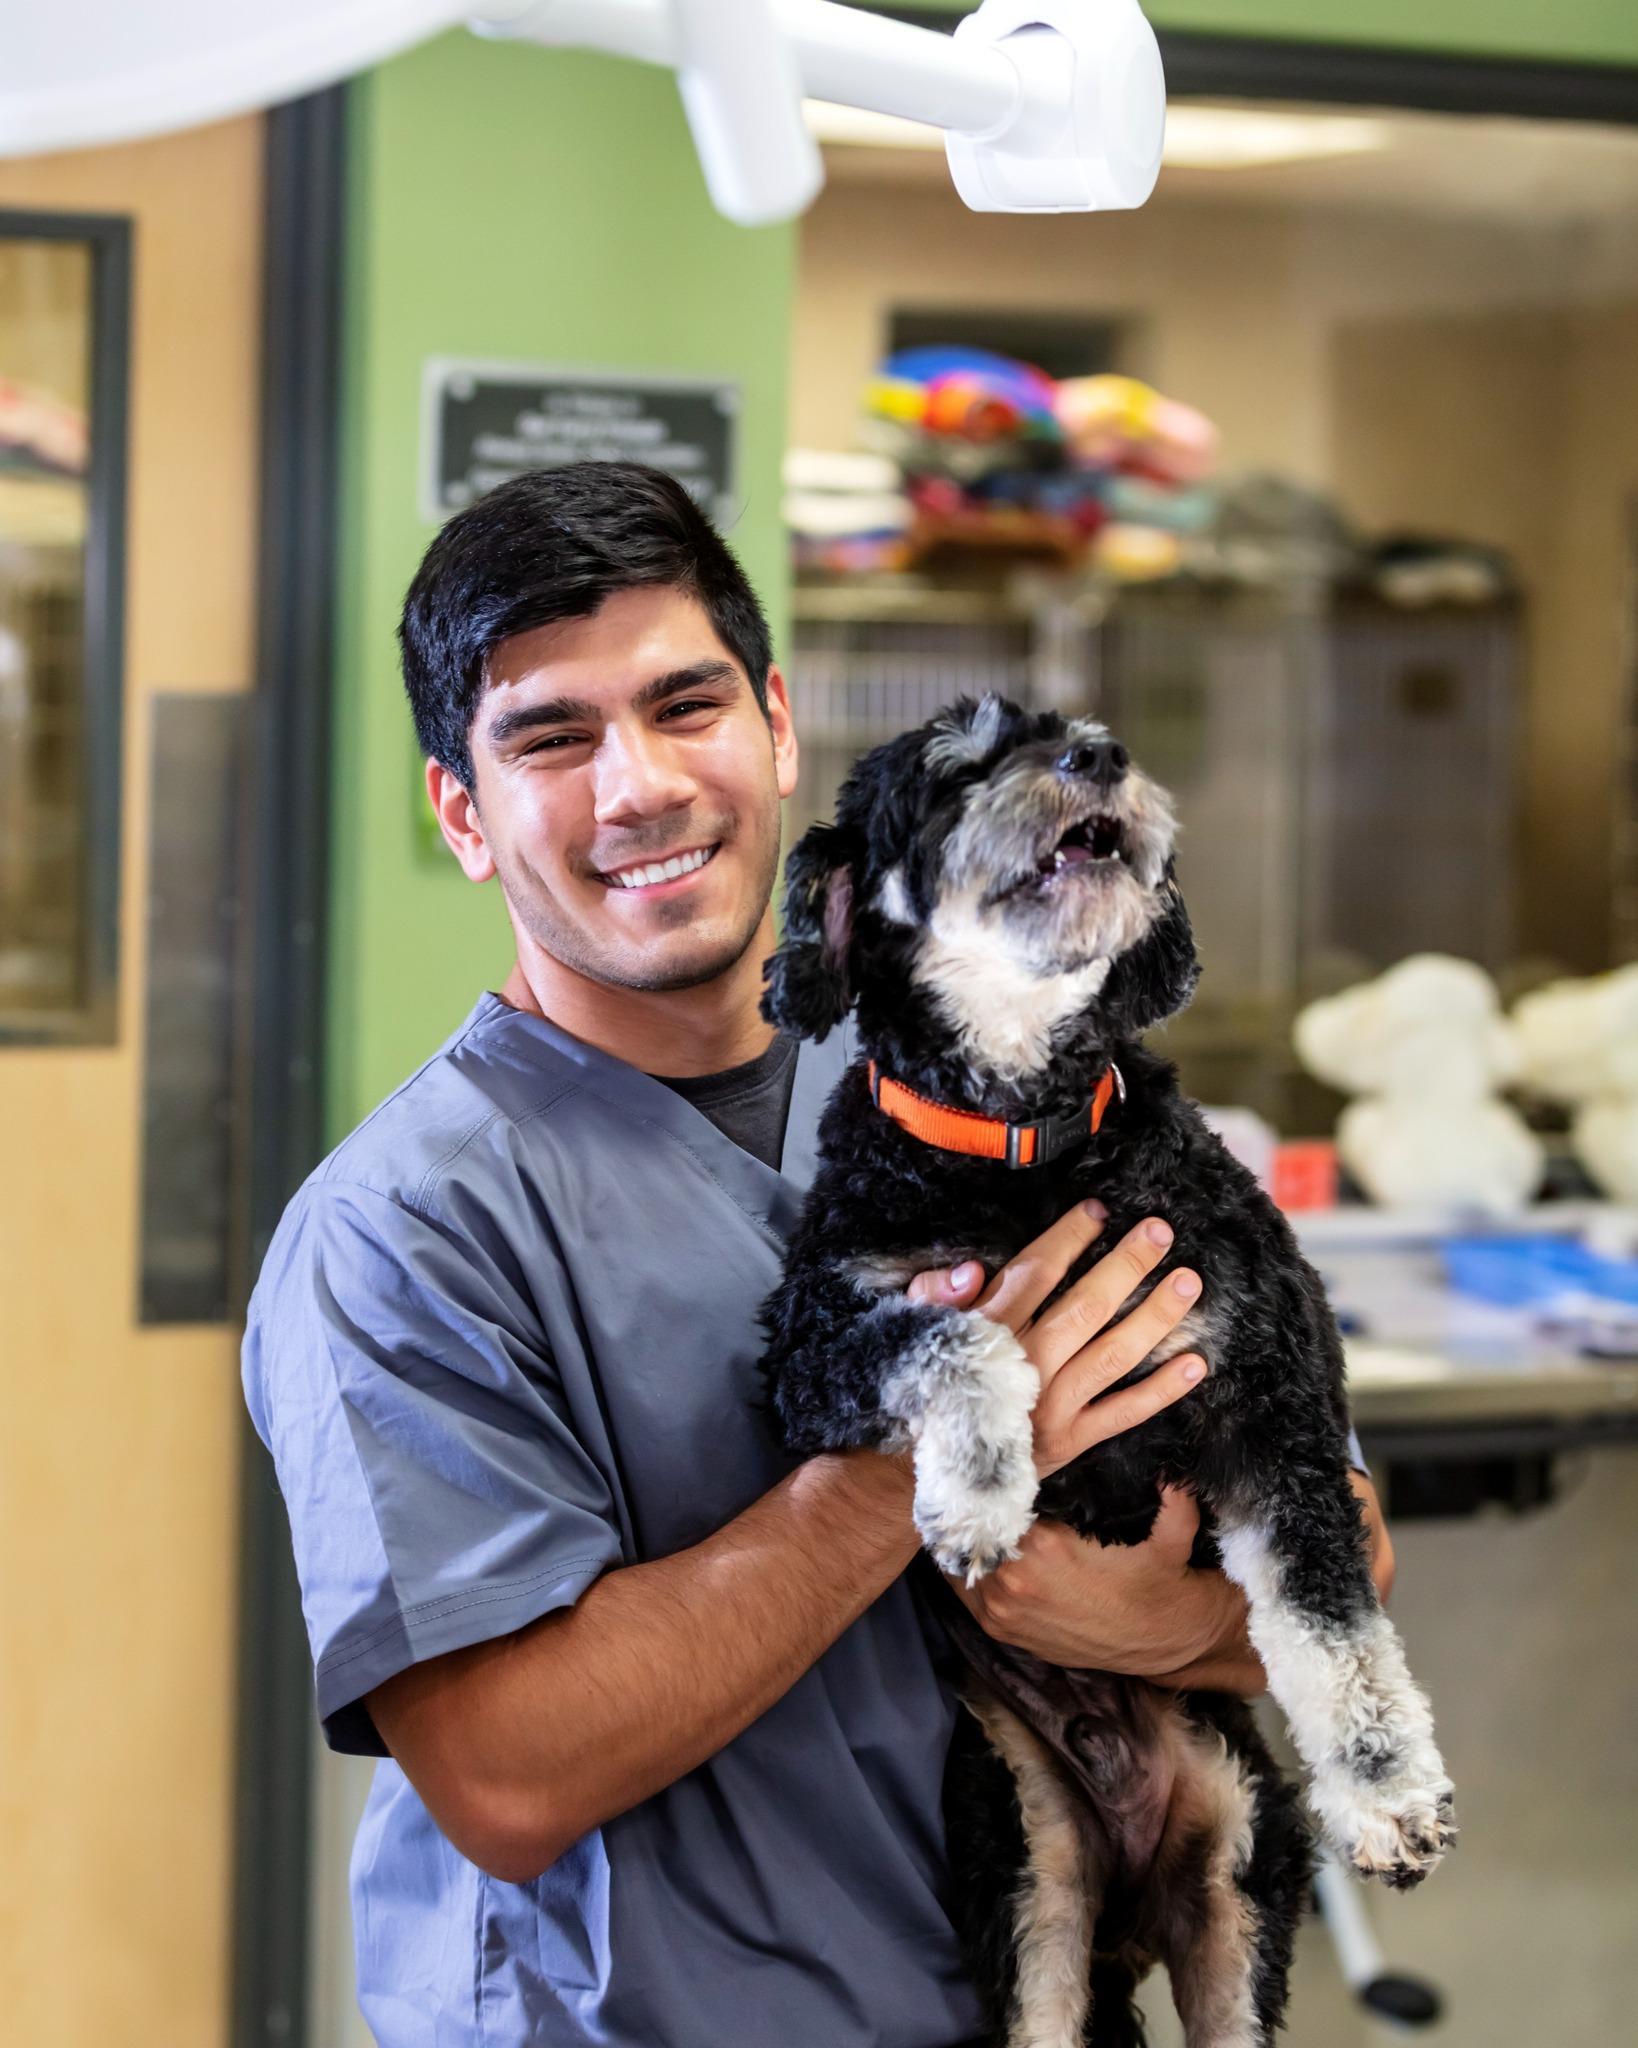 Pet Friendly Dr. Kathy's Veterinary Care